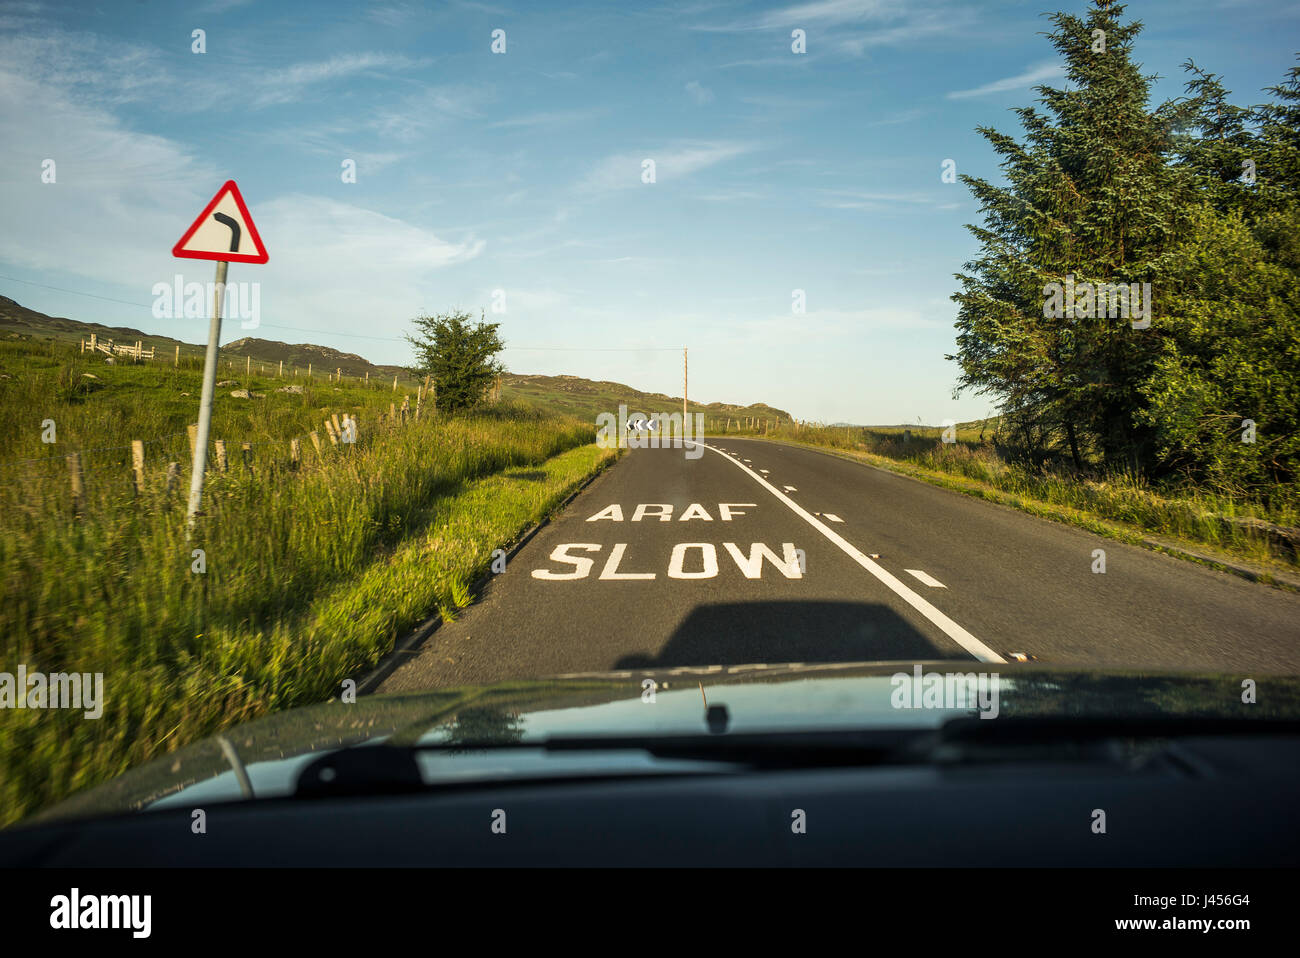 A slow sign in English and Welsh seen from inside a car painted on the tarmac before a bend in the road in Snowdonia, Wales,U.K. Stock Photo